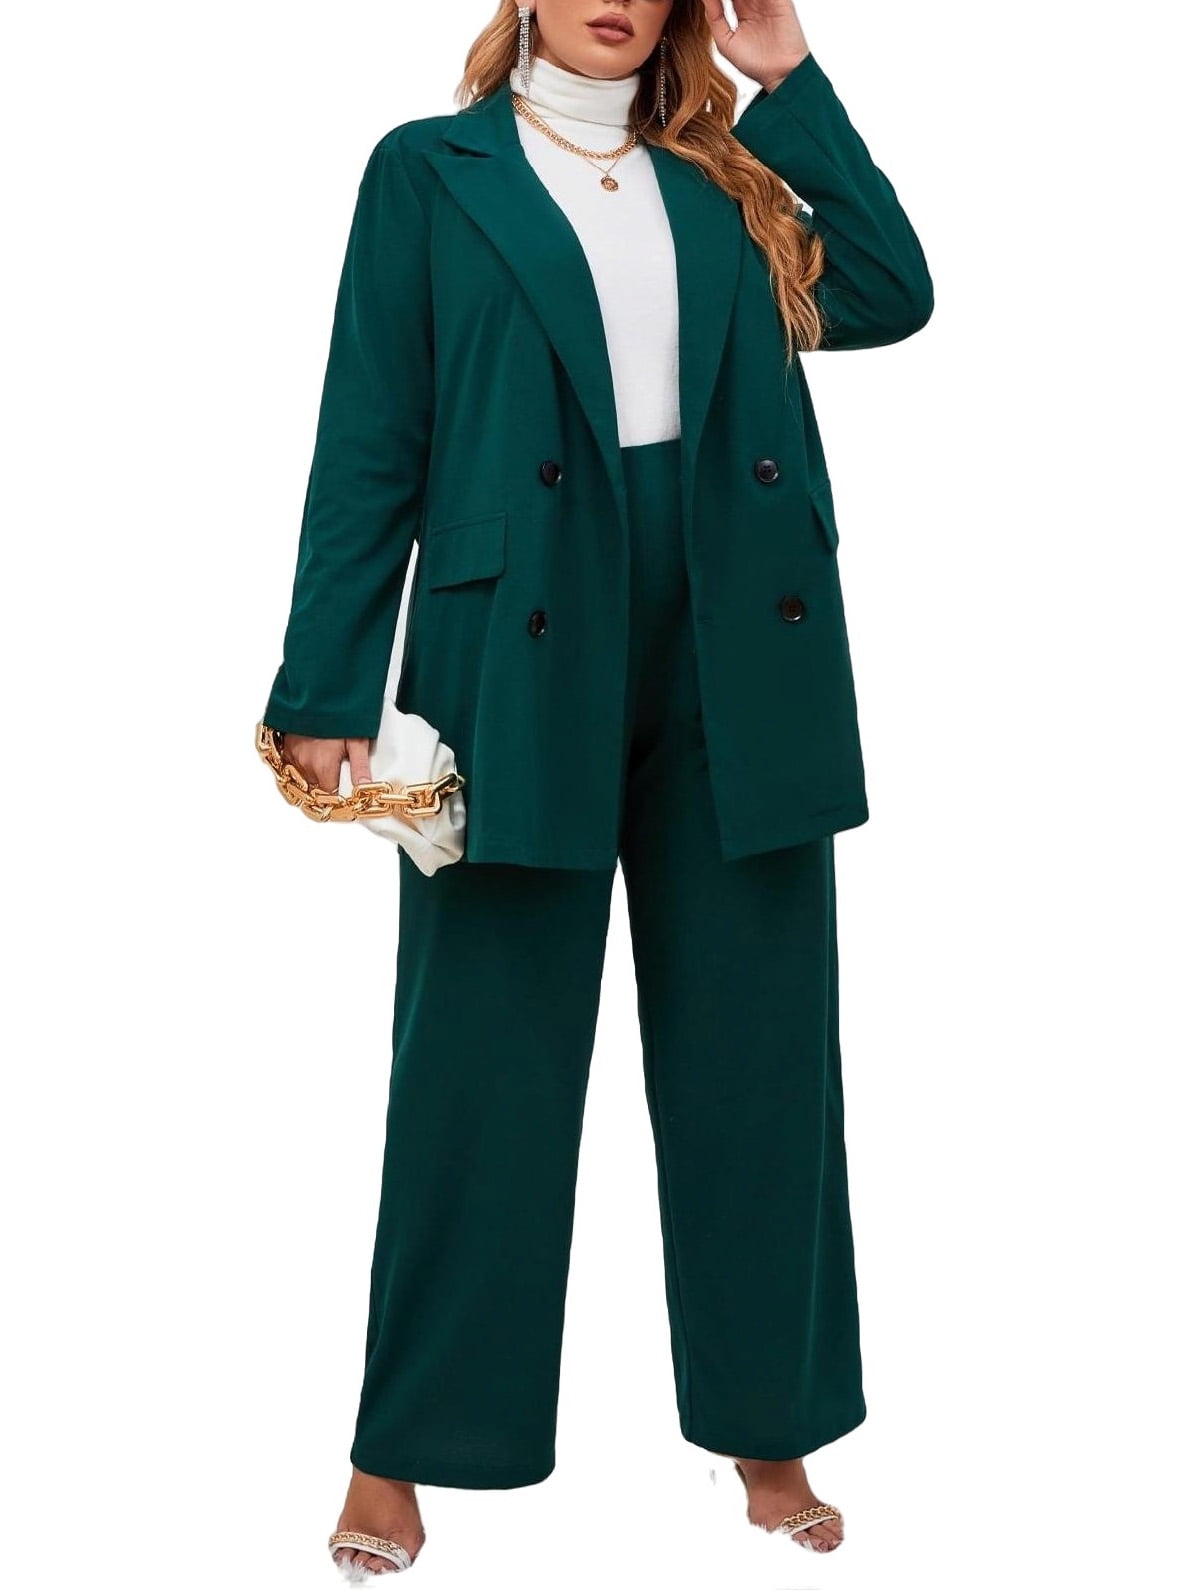 Spring Plus Size Suit for Women - Light Green  Plus size suits, Suits for  women, Plus size outfits